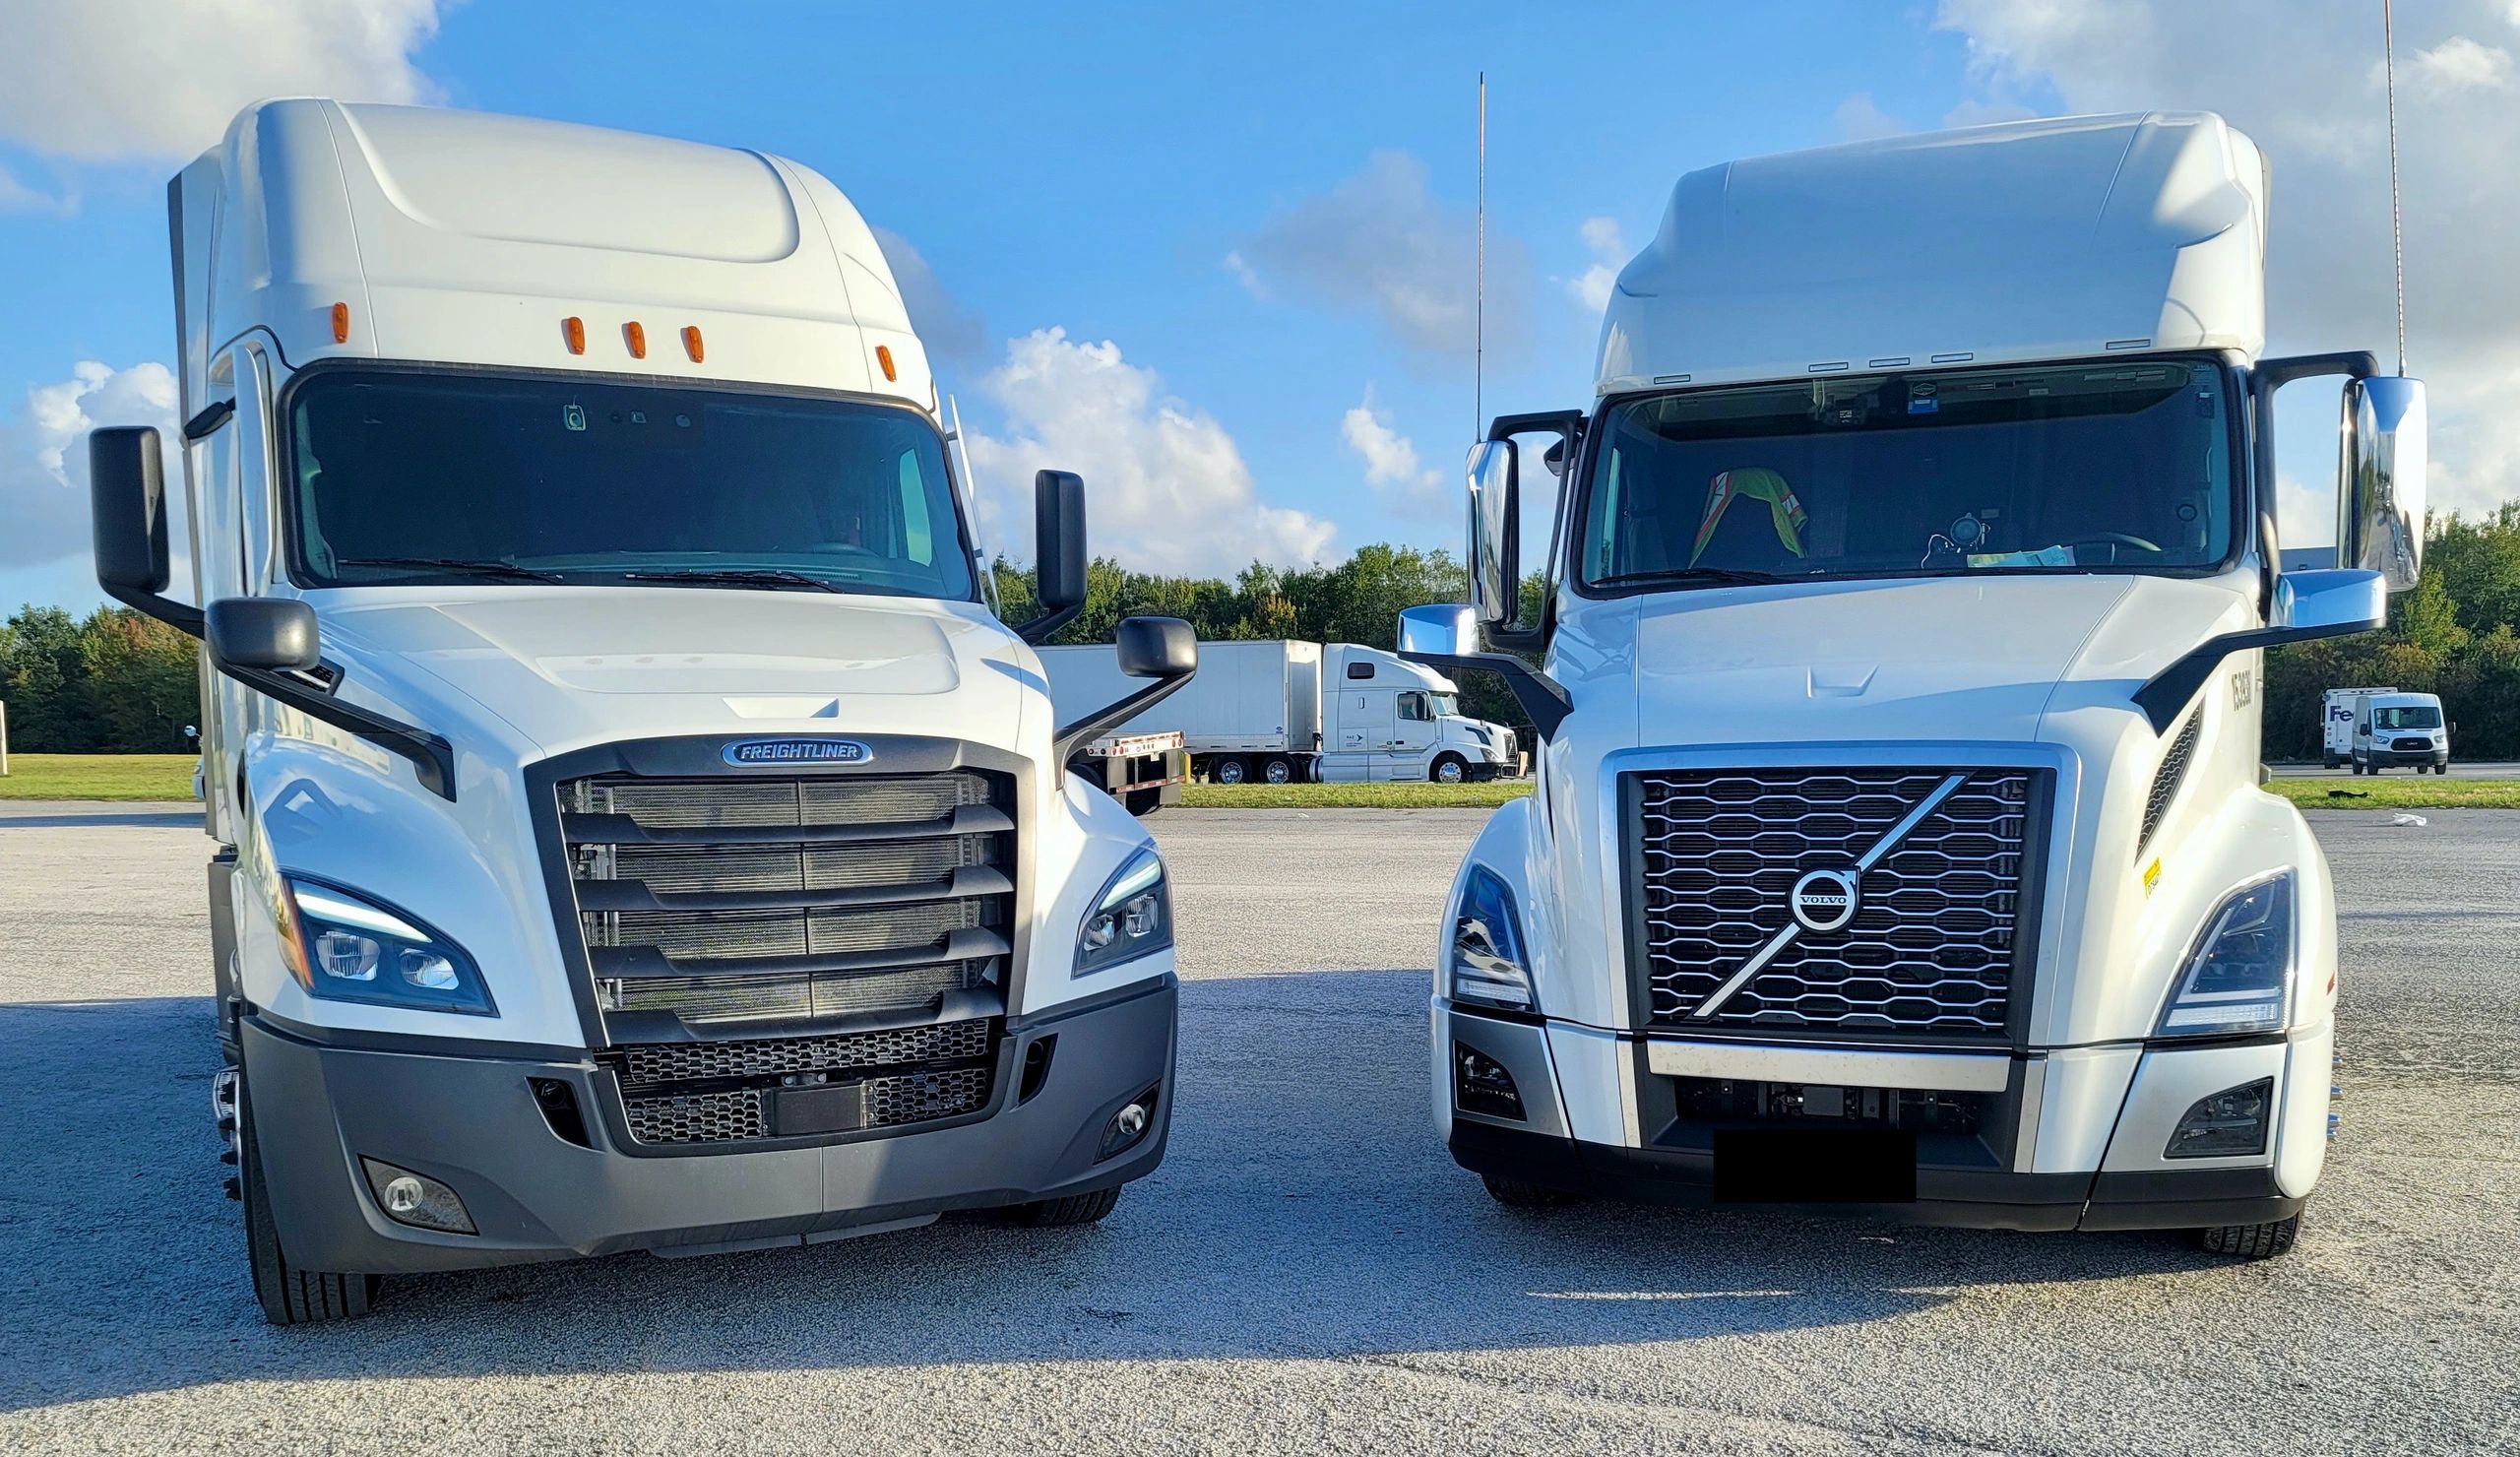 Two white delivery trucks